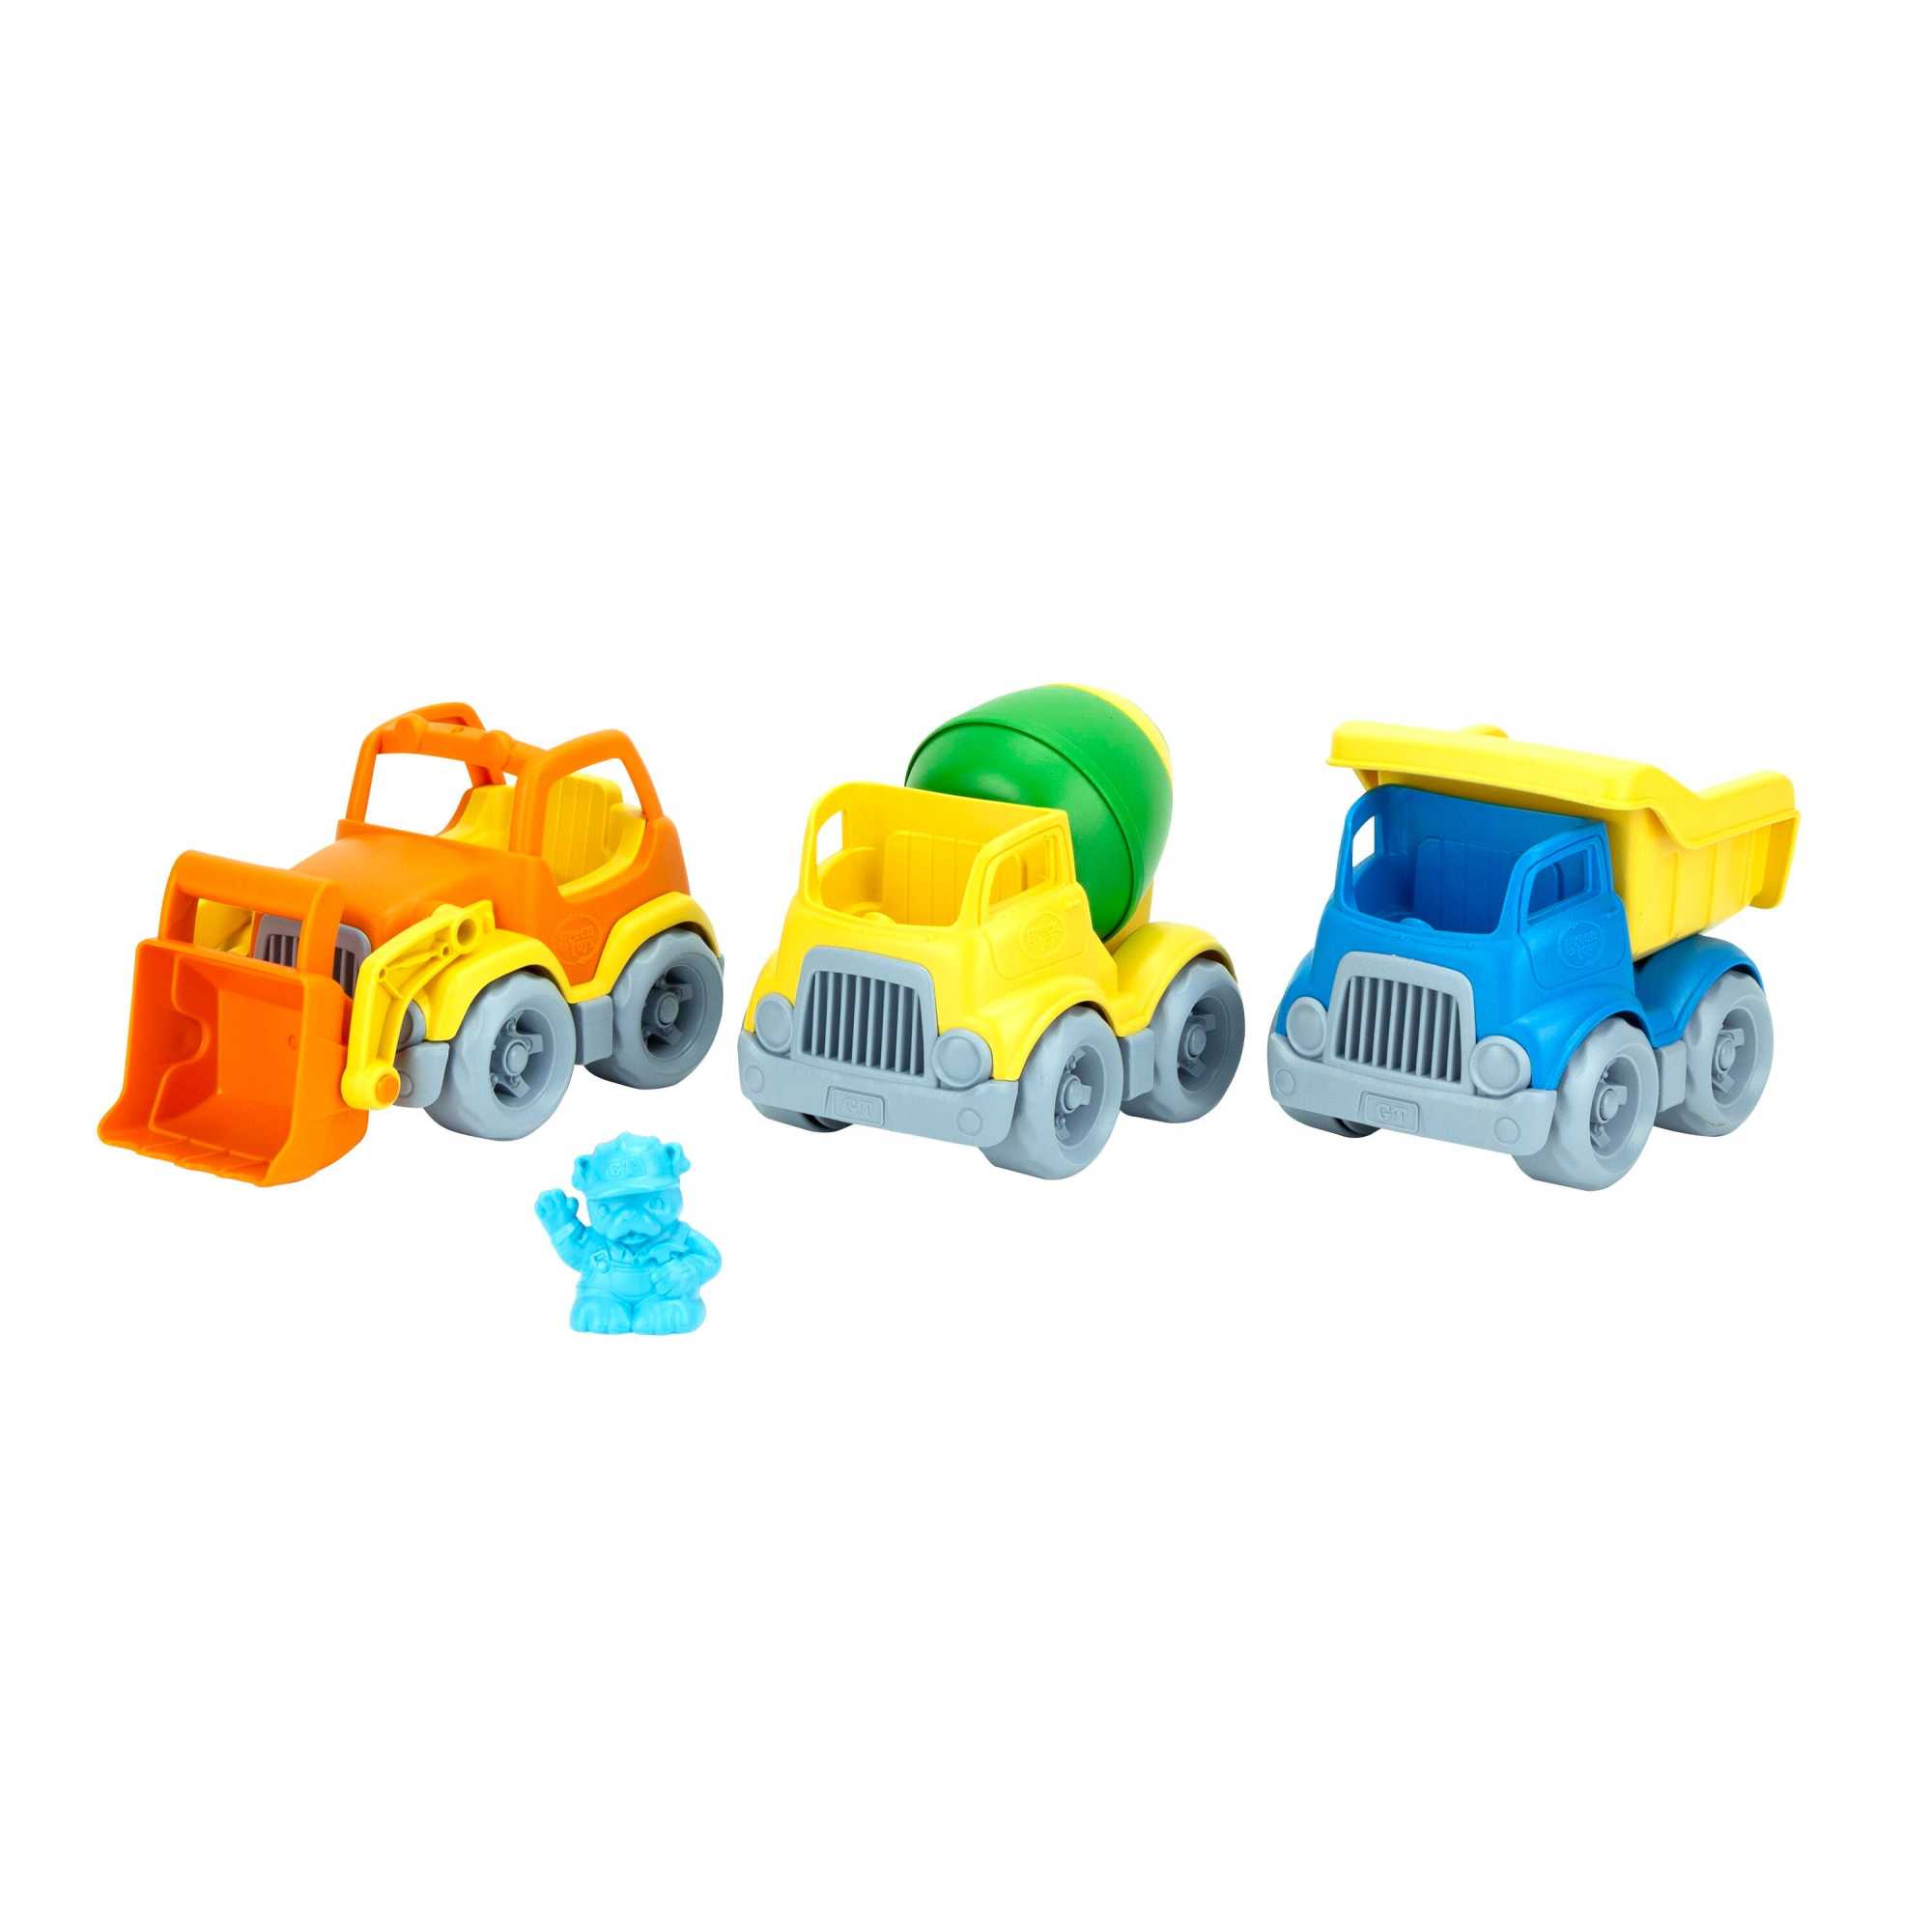 Green Toys Construction Truck, Set of 3 - image 1 of 3